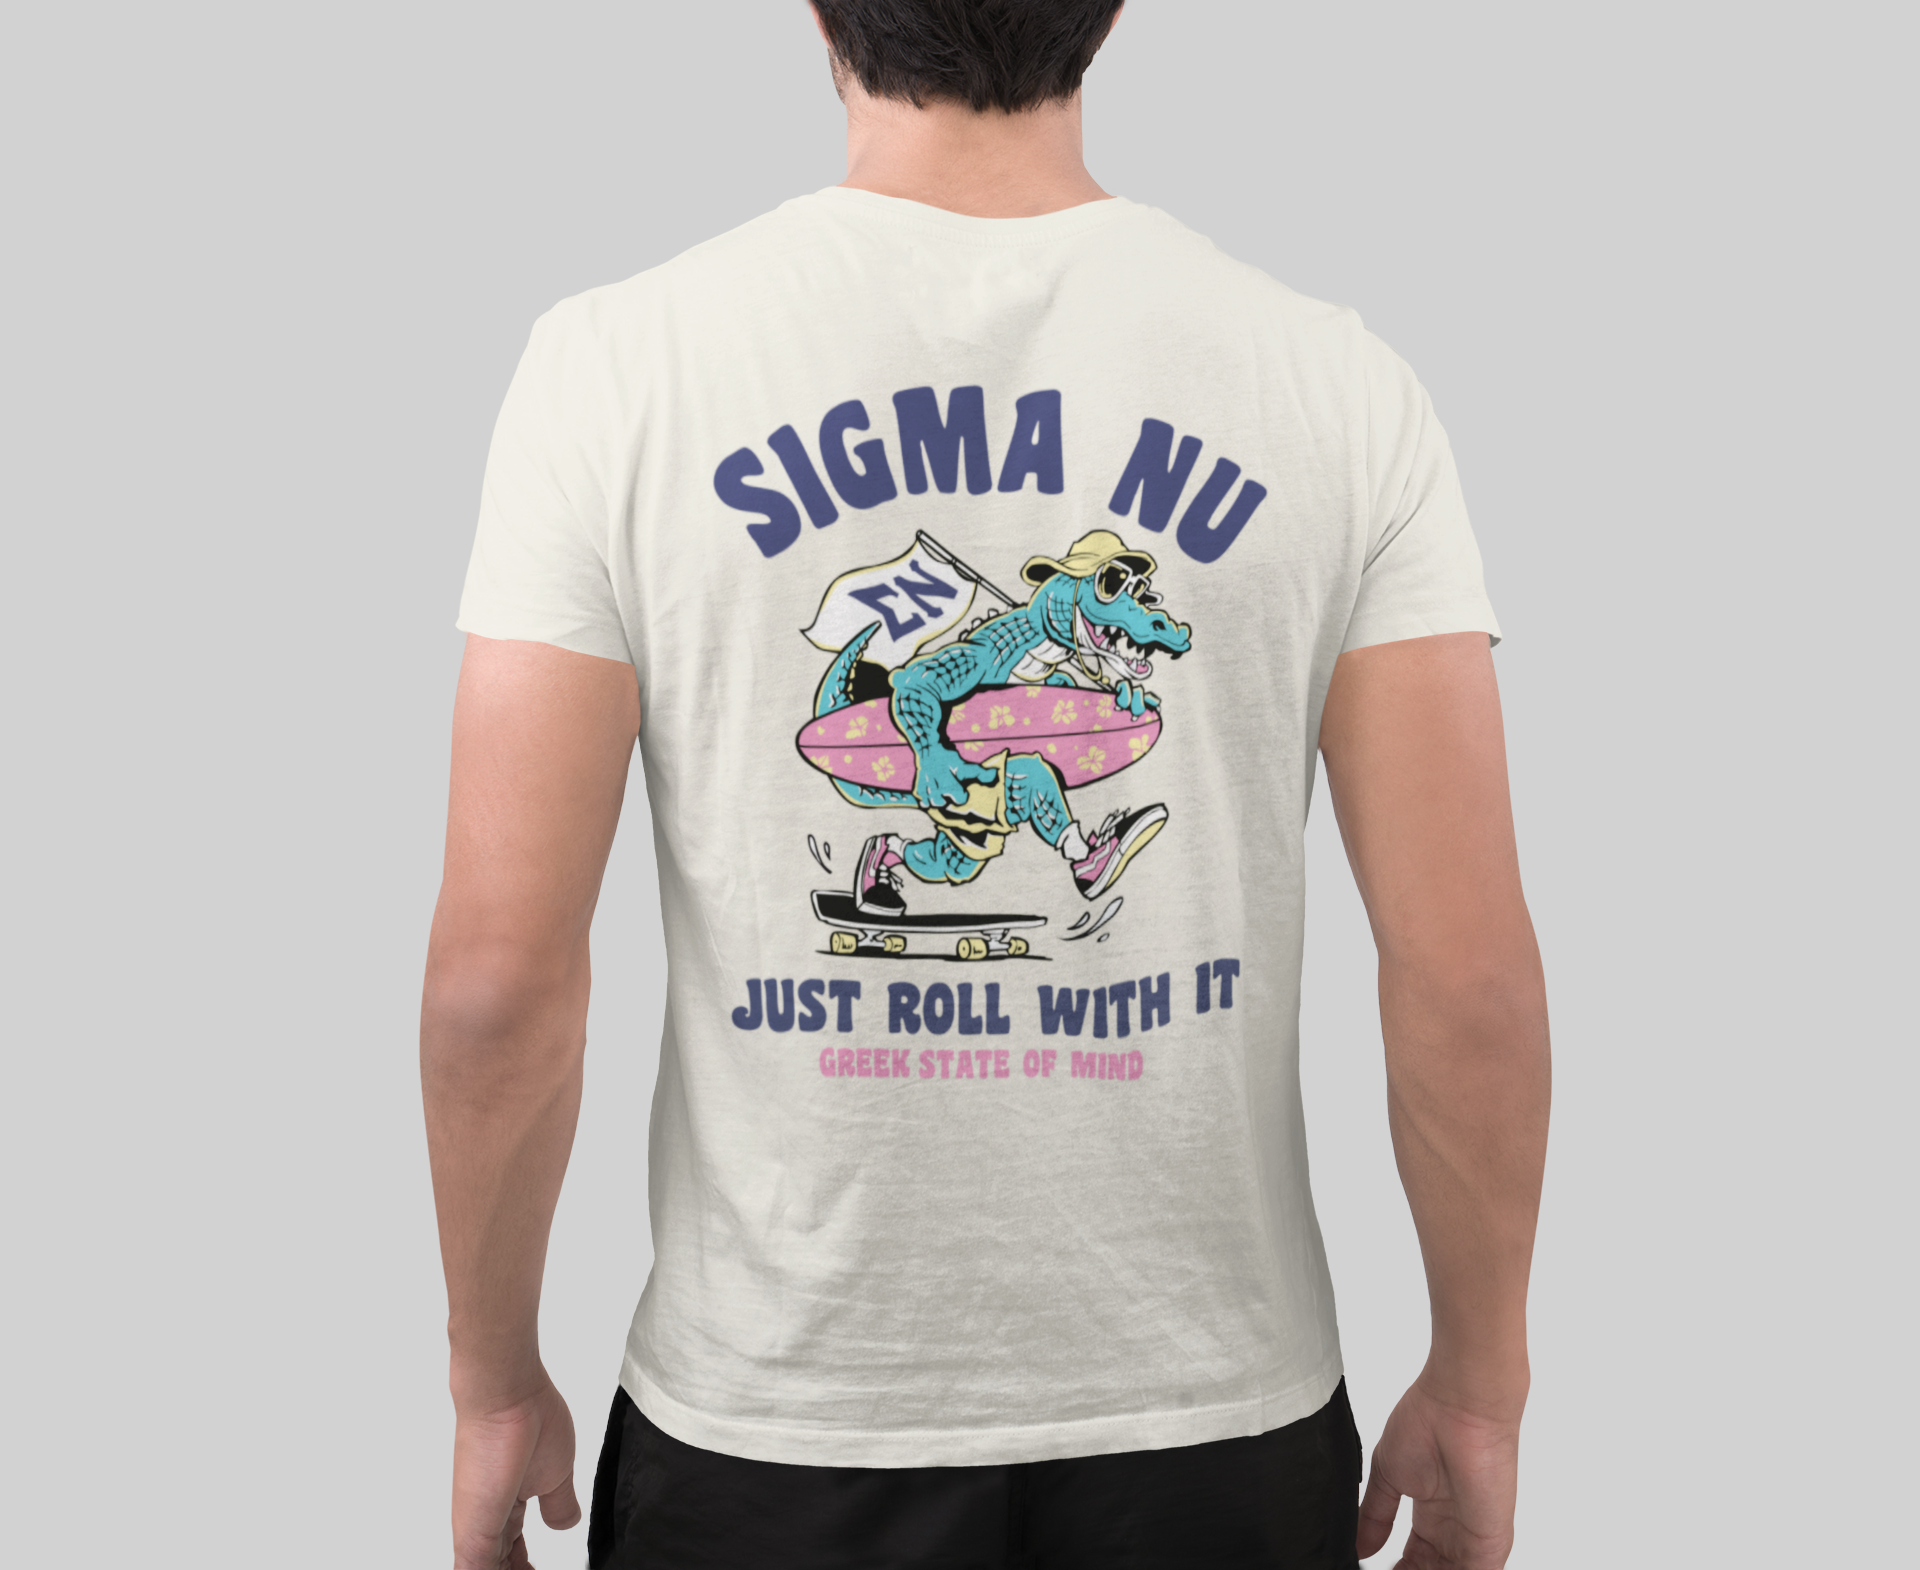 Sigma Nu Graphic T-Shirt | Alligator Skater | Sigma Nu Clothing, Apparel and Merchandise model 